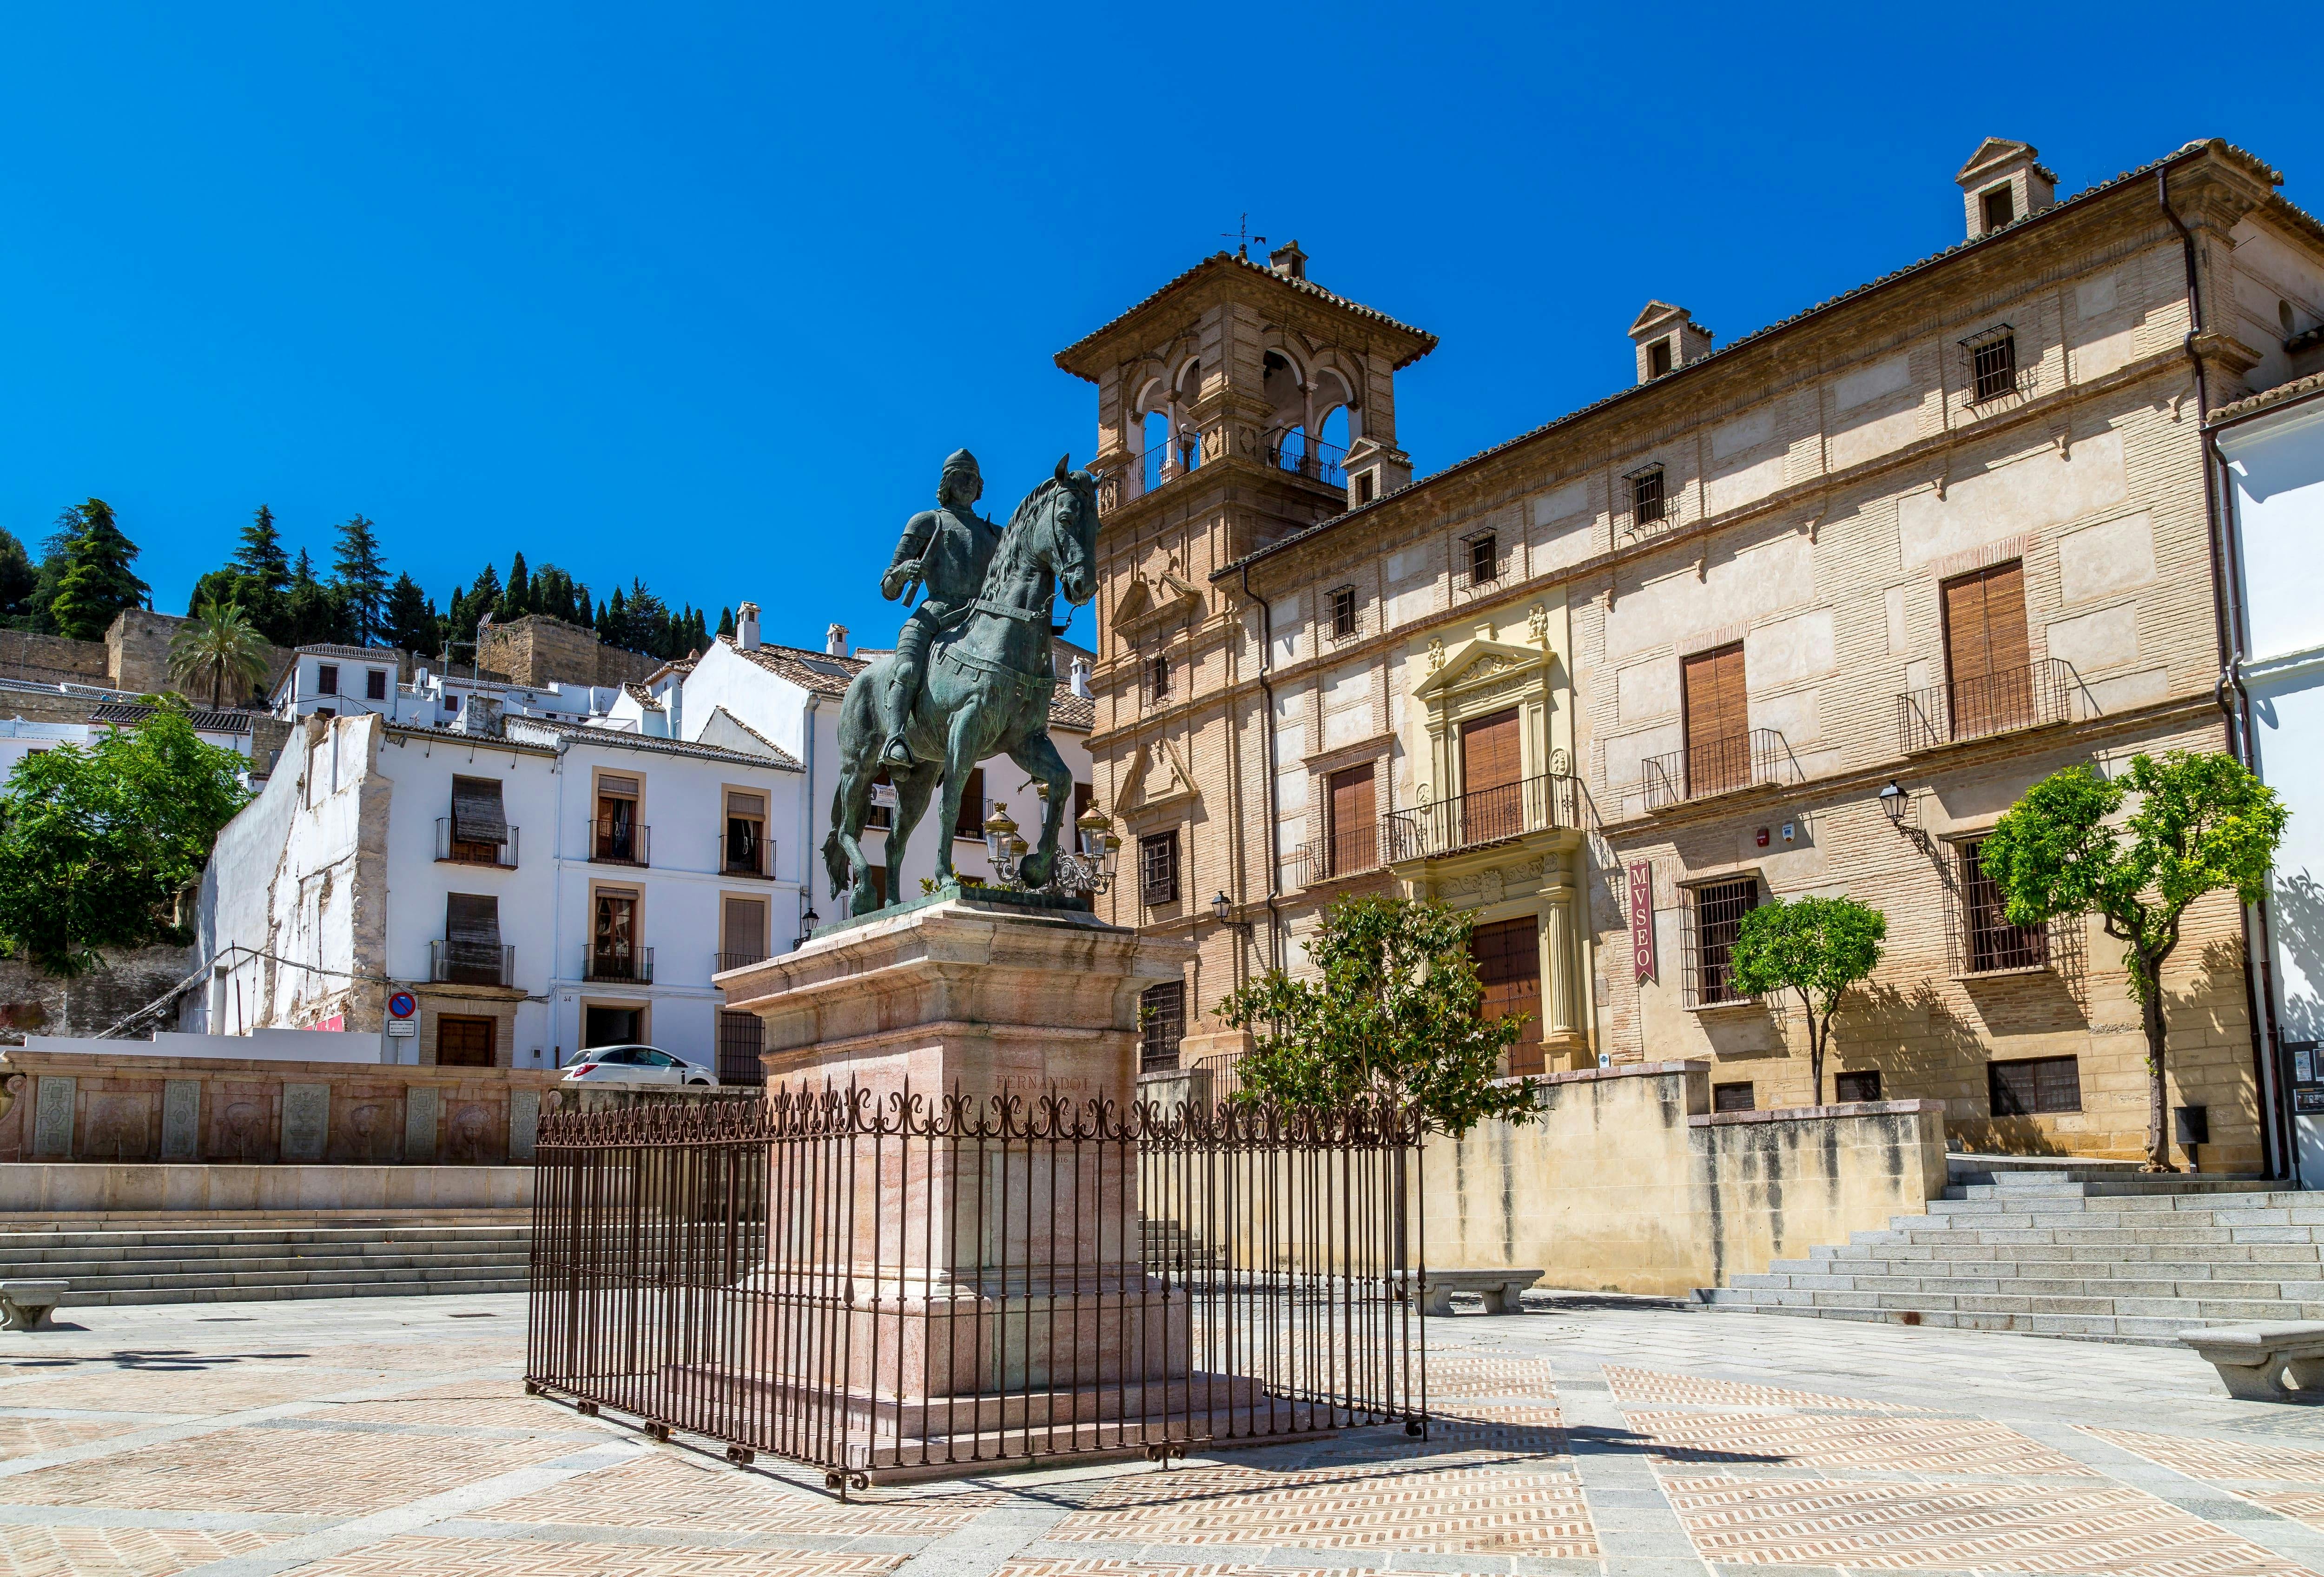 Andalusia Tour with El Torcal, Antequera & Wine Tasting